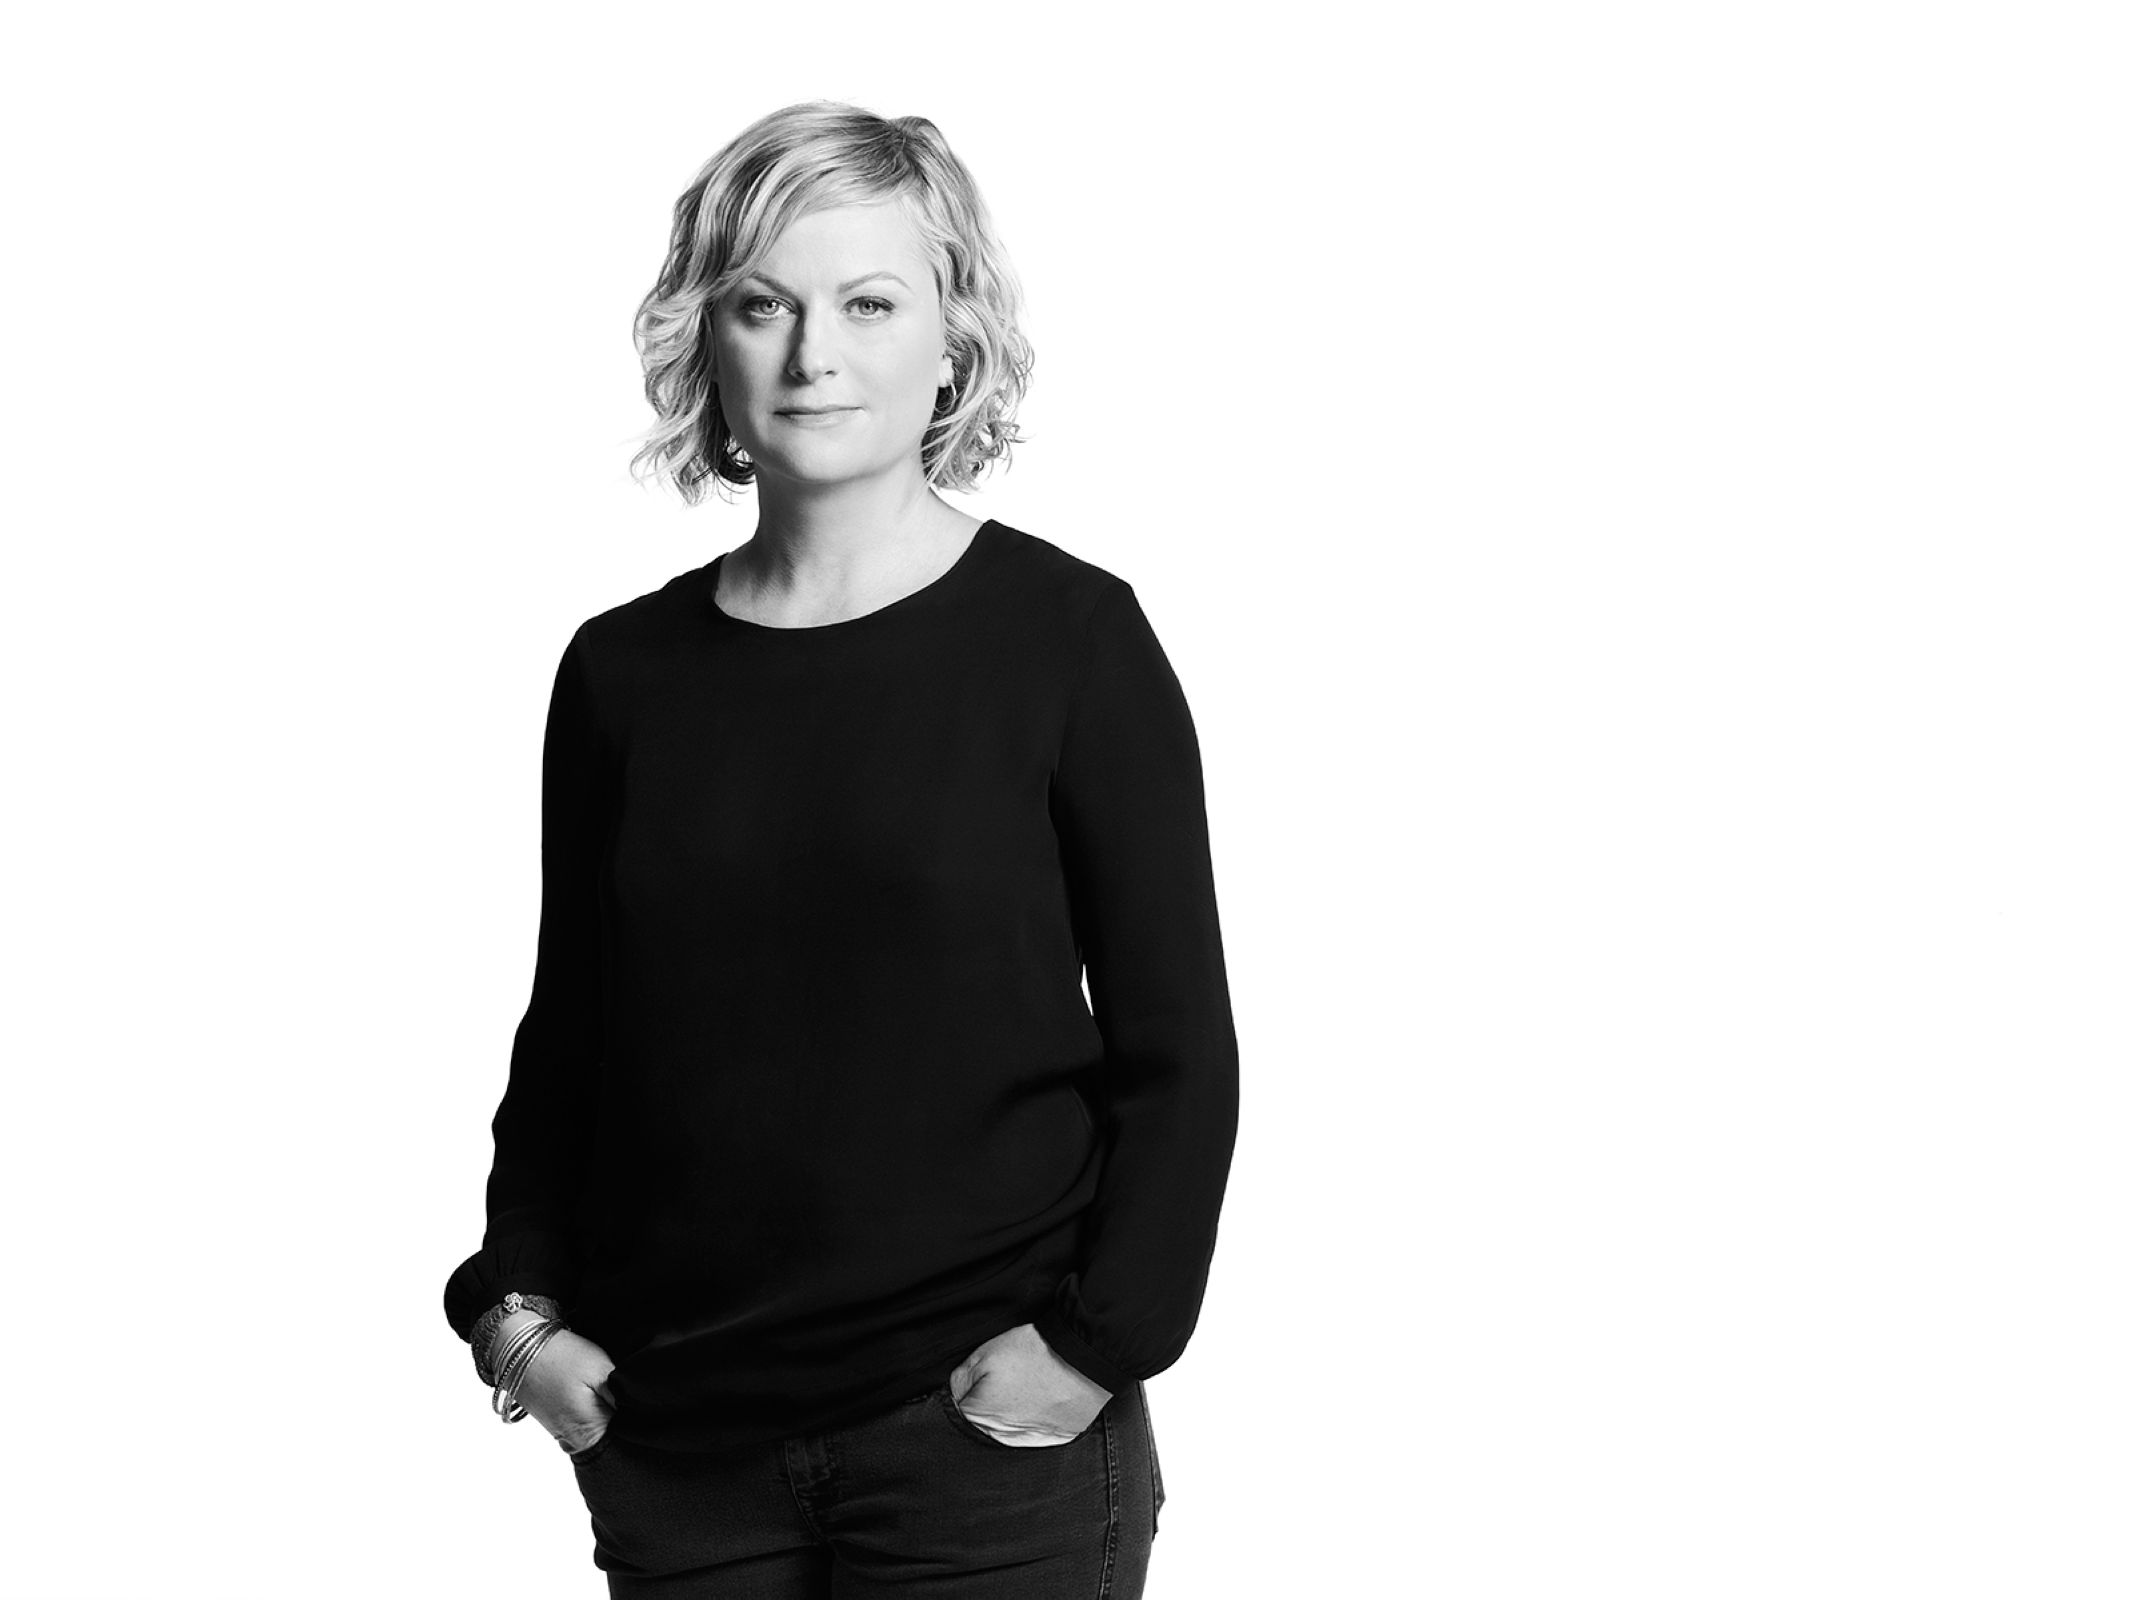 Amy Poehler by Timothy White, black and white portrait of the actress in a black shirt